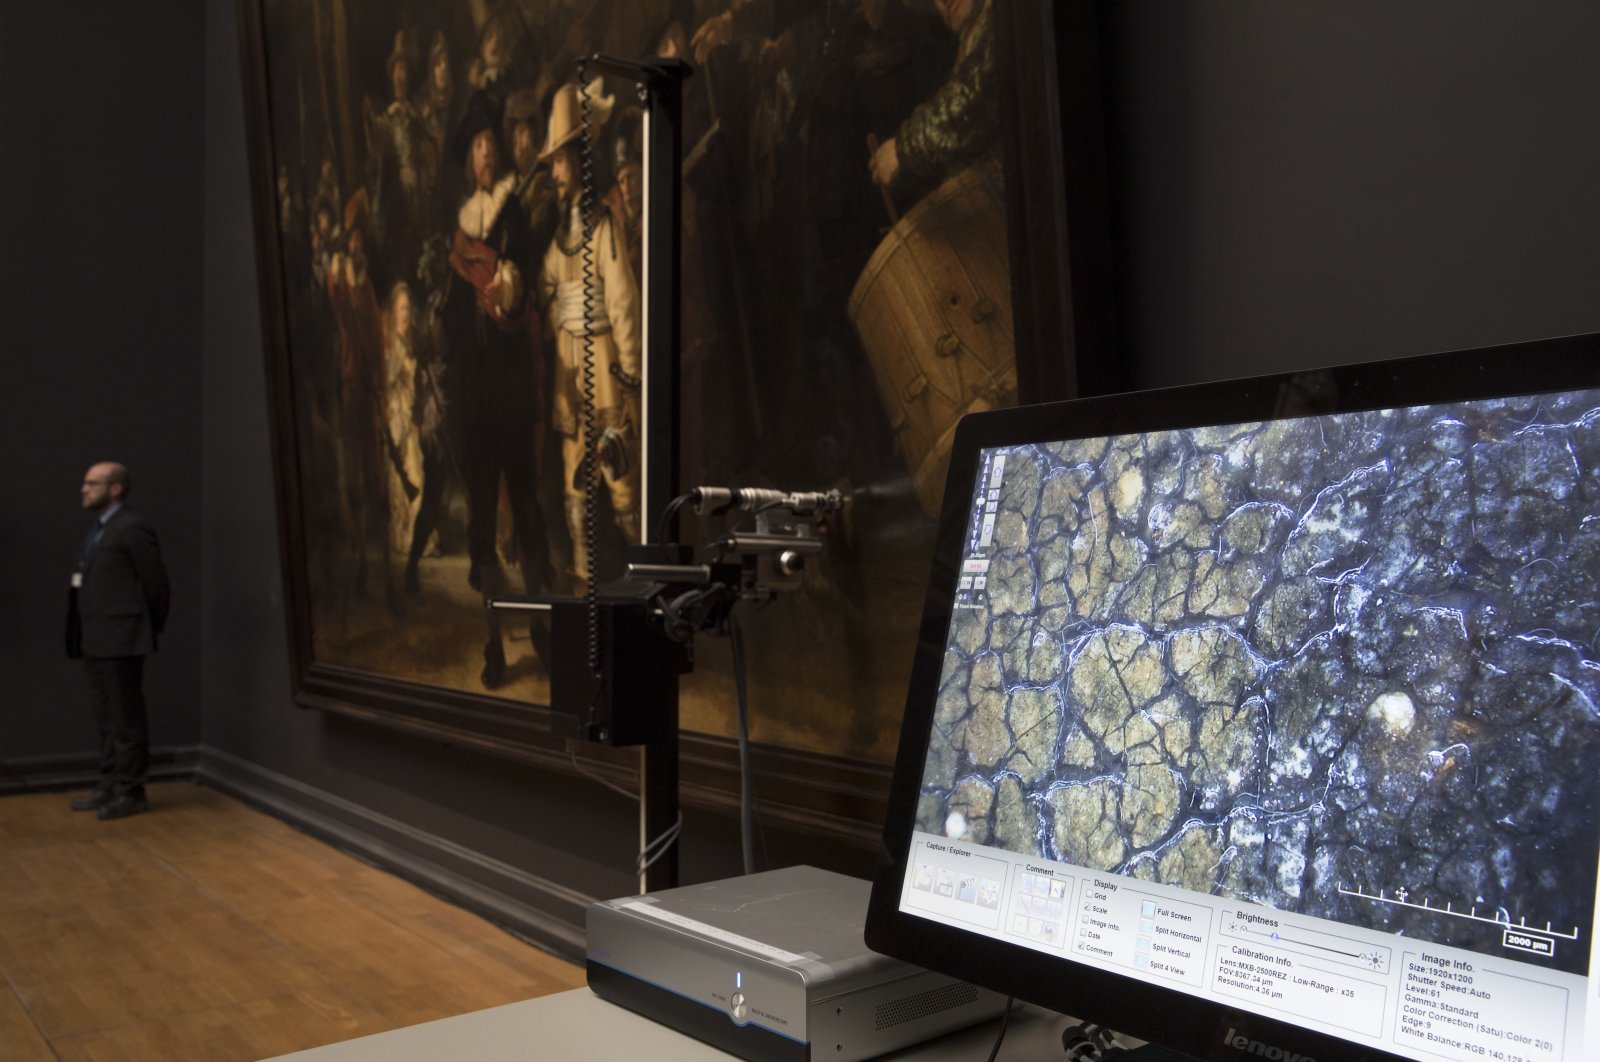 A microscopic image enlarging a 4x6 millimeter part of the painting on Rembrandt&#039;s "Night Watch" is seen on a screen next to the painting at the Rijksmuseum in Amsterdam, Netherlands, Oct. 16, 2018. (AP Photo/Peter Dejong)